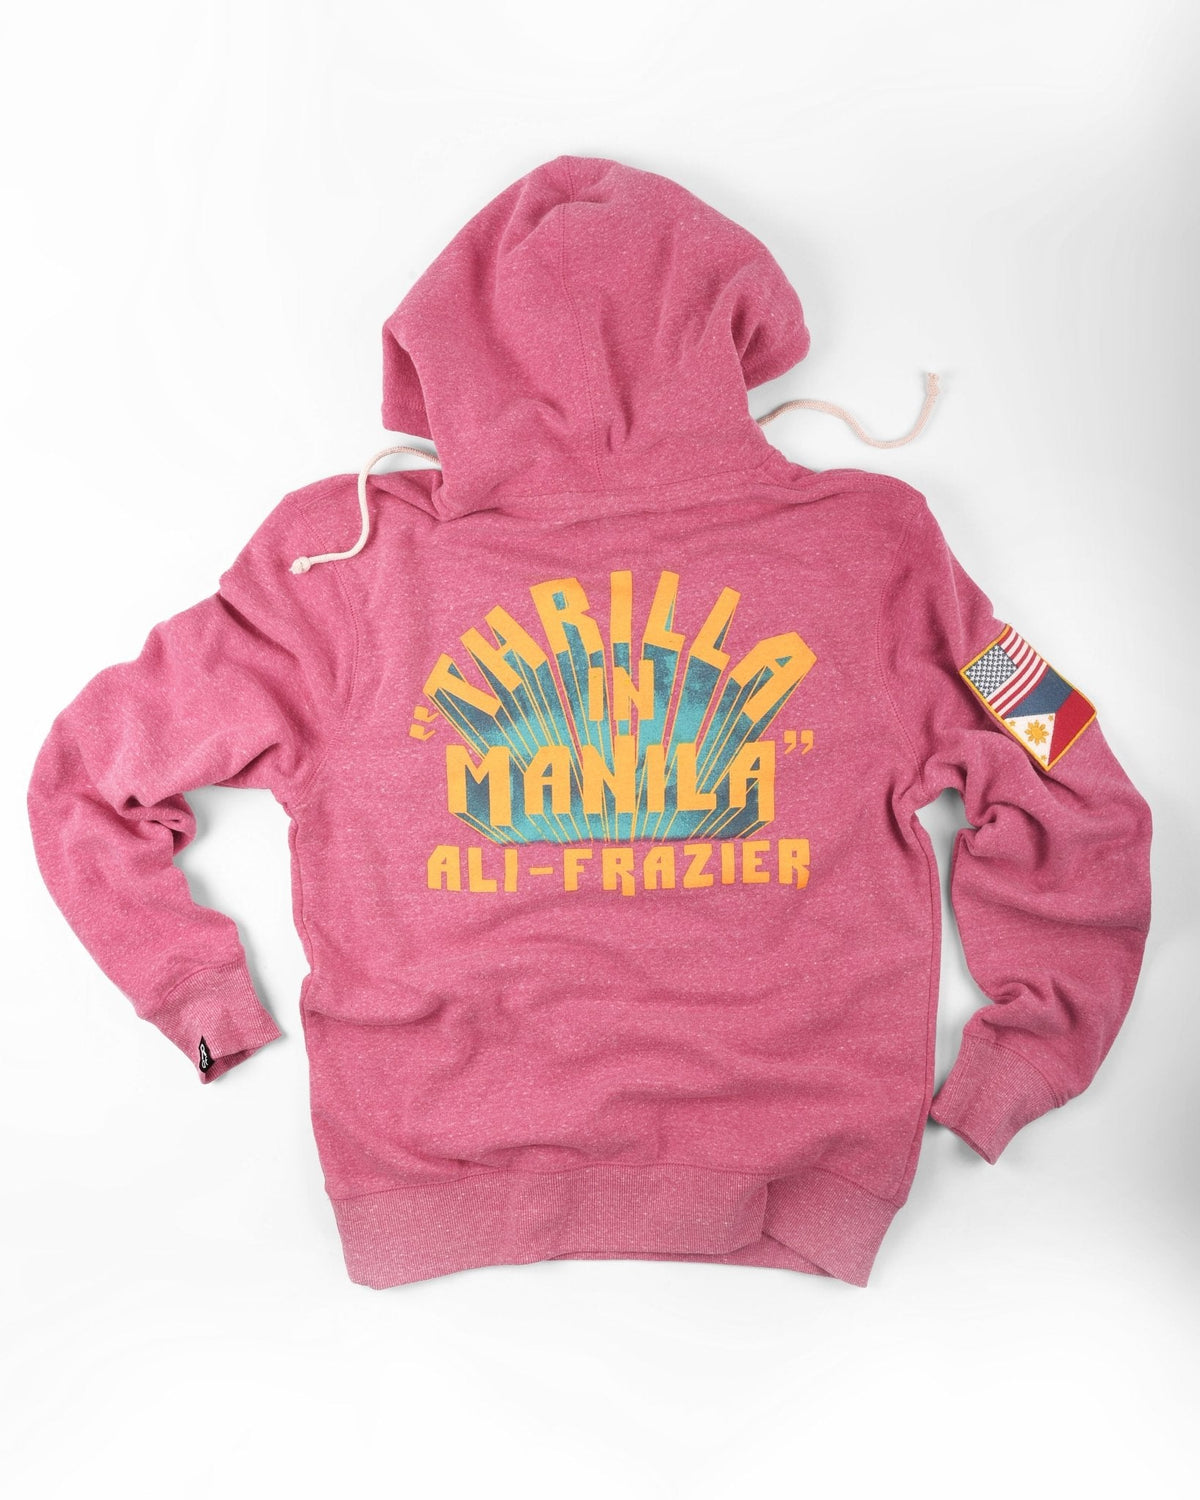 Thrilla in Manila Pink PO Hoody - Roots of Fight Canada